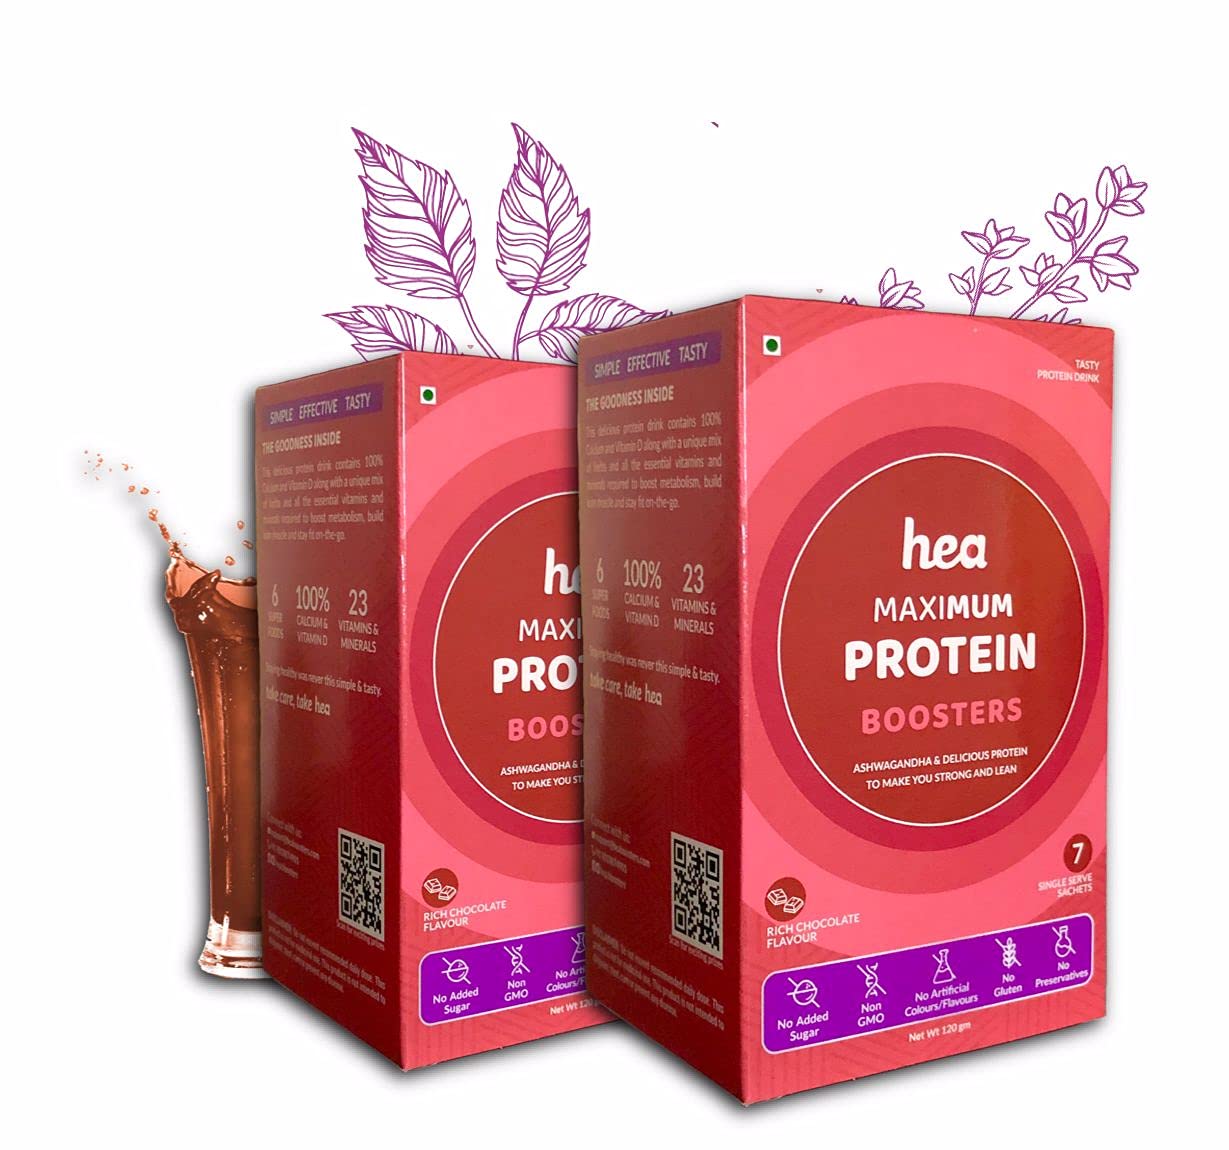 gifts for 40 year old woman - Hea Maximum Protein Boosters 